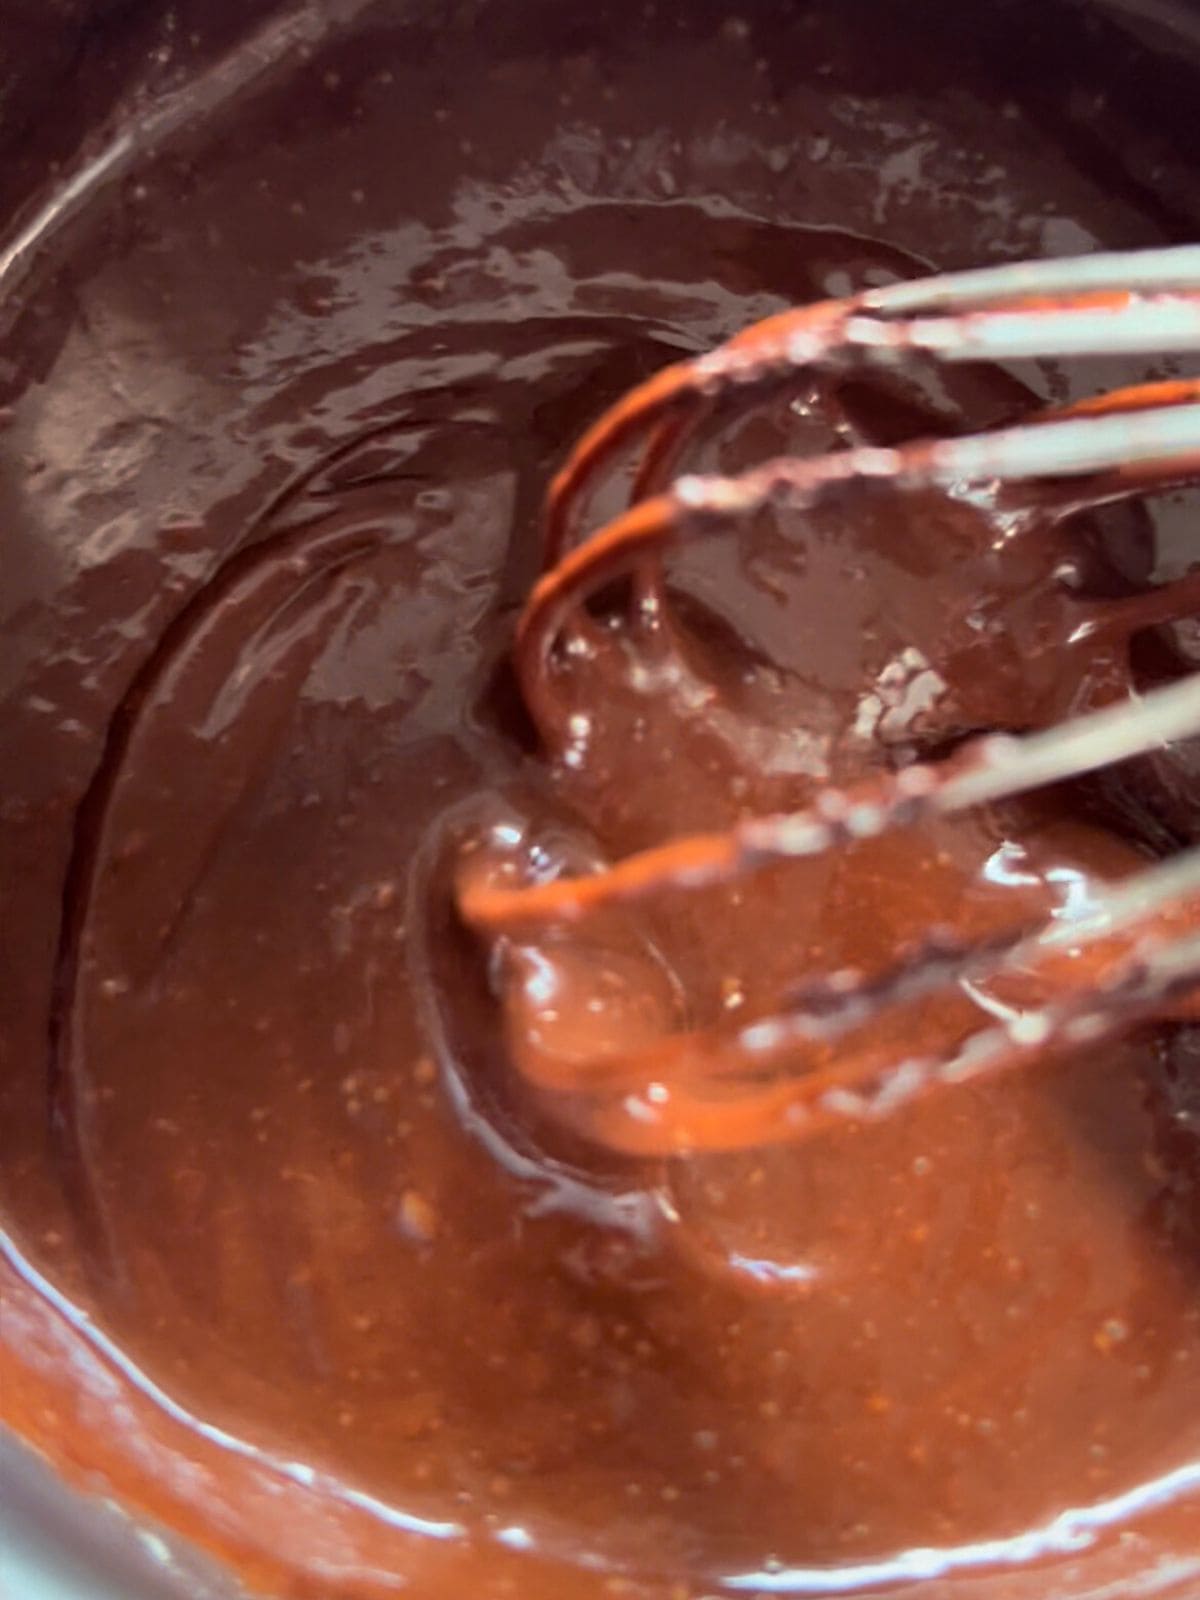 Mixing the chocolate sauce in pan.